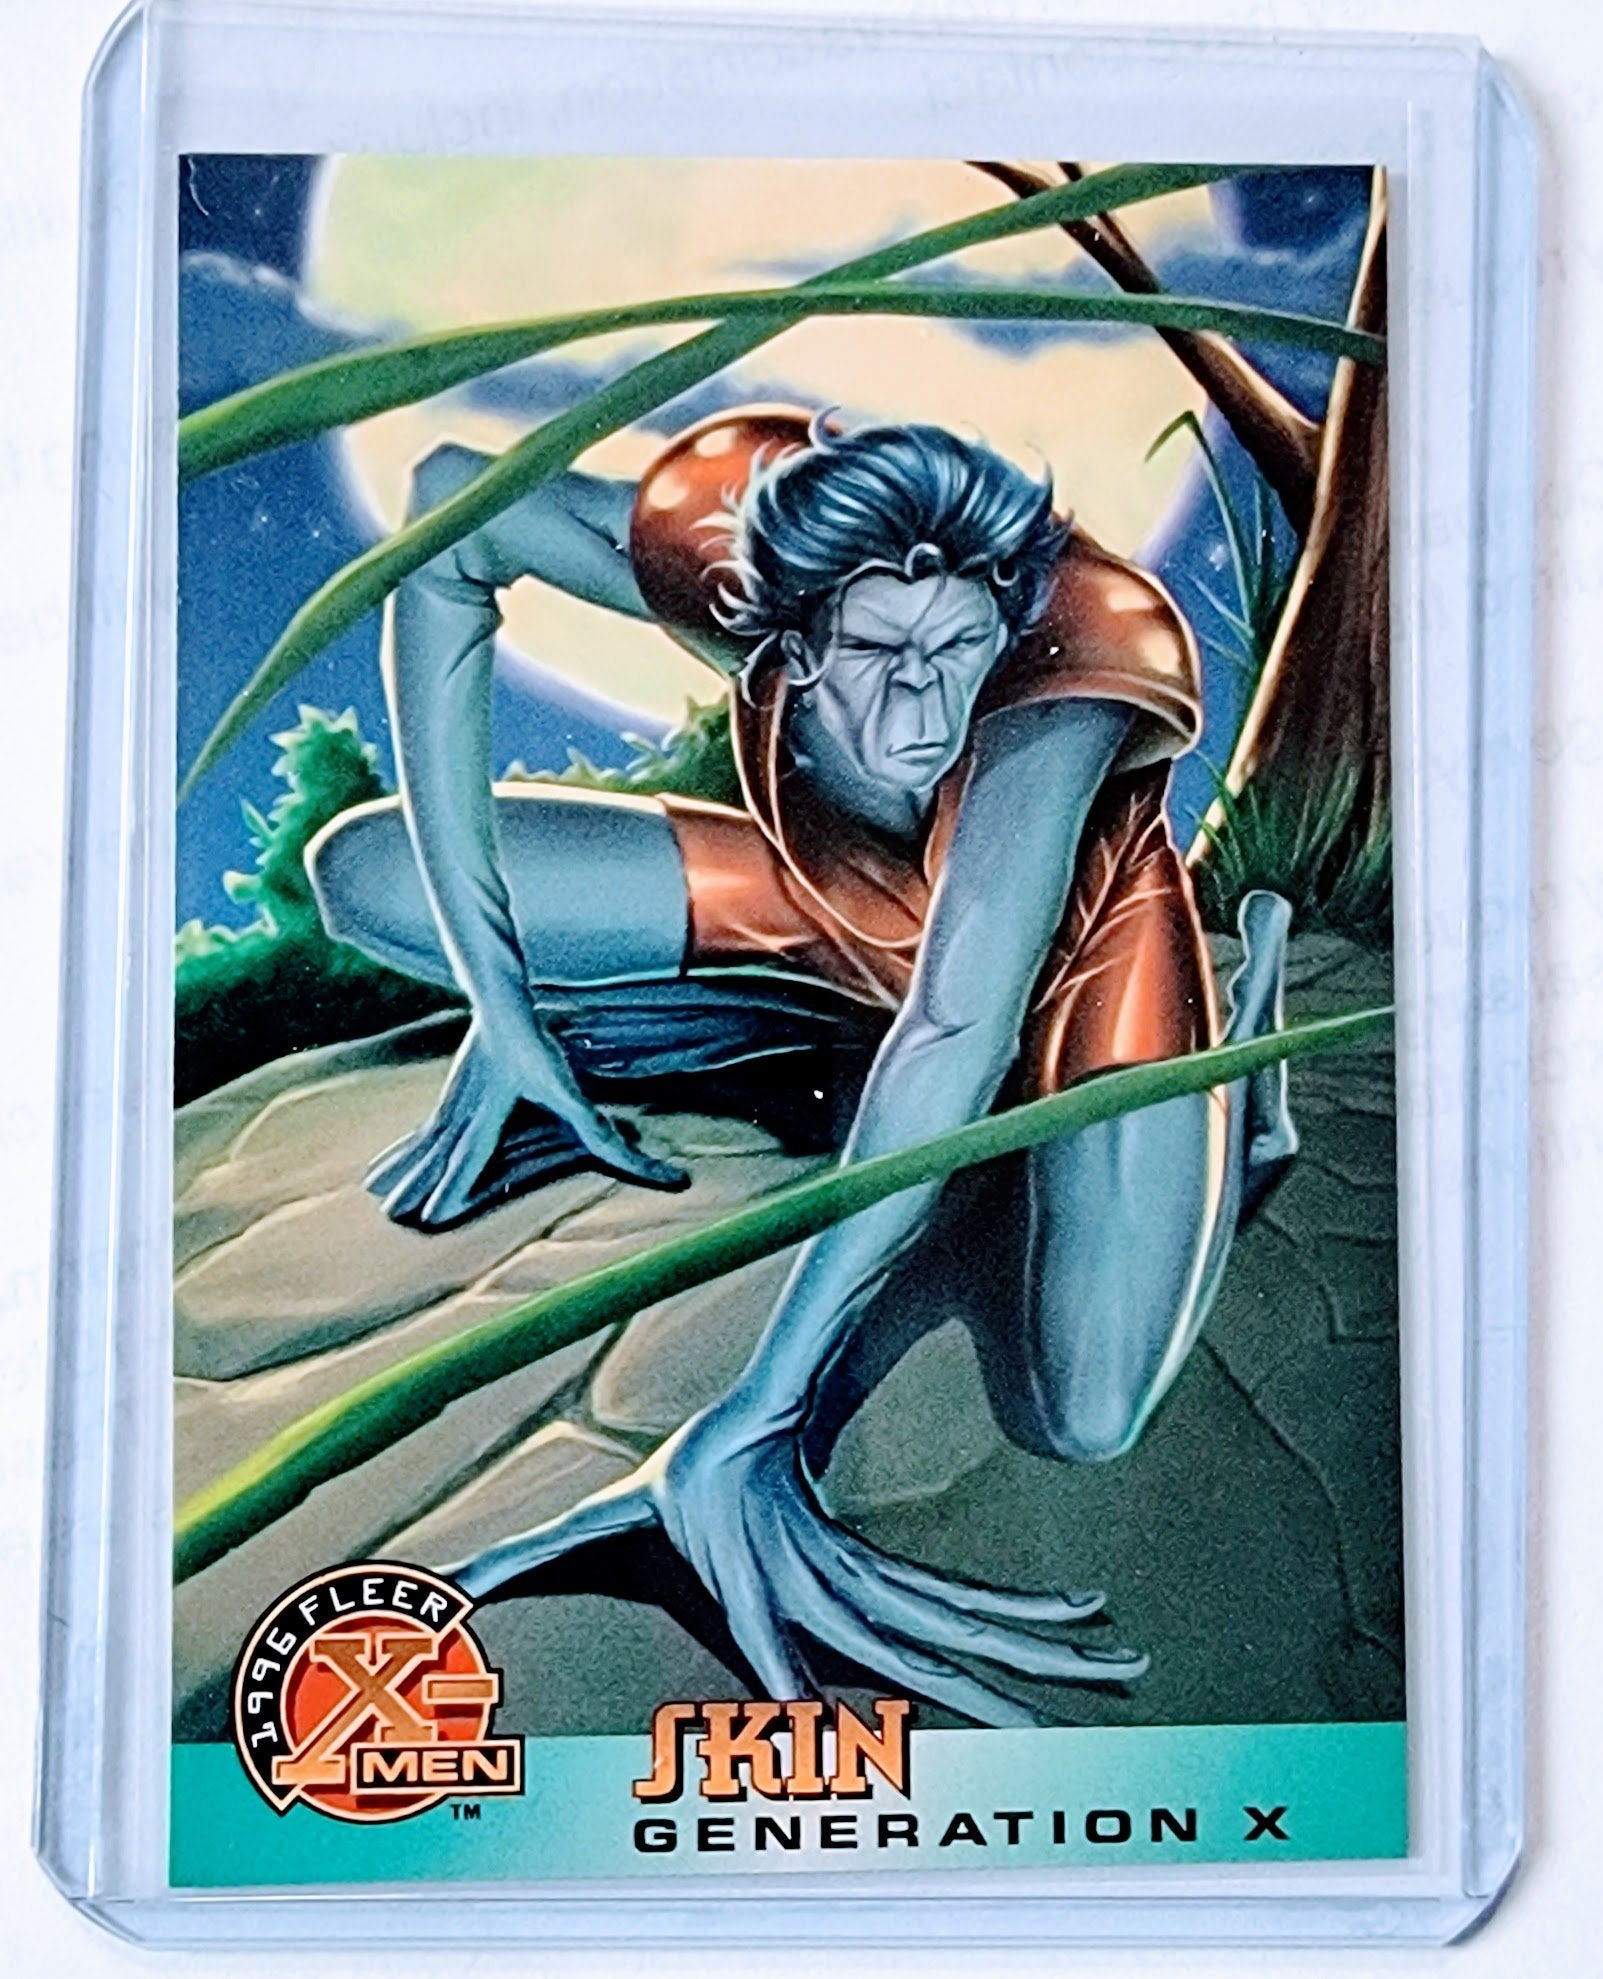 1996 Fleer X-Men Skin Generation X Marvel Trading Card GRB1 simple Xclusive Collectibles   